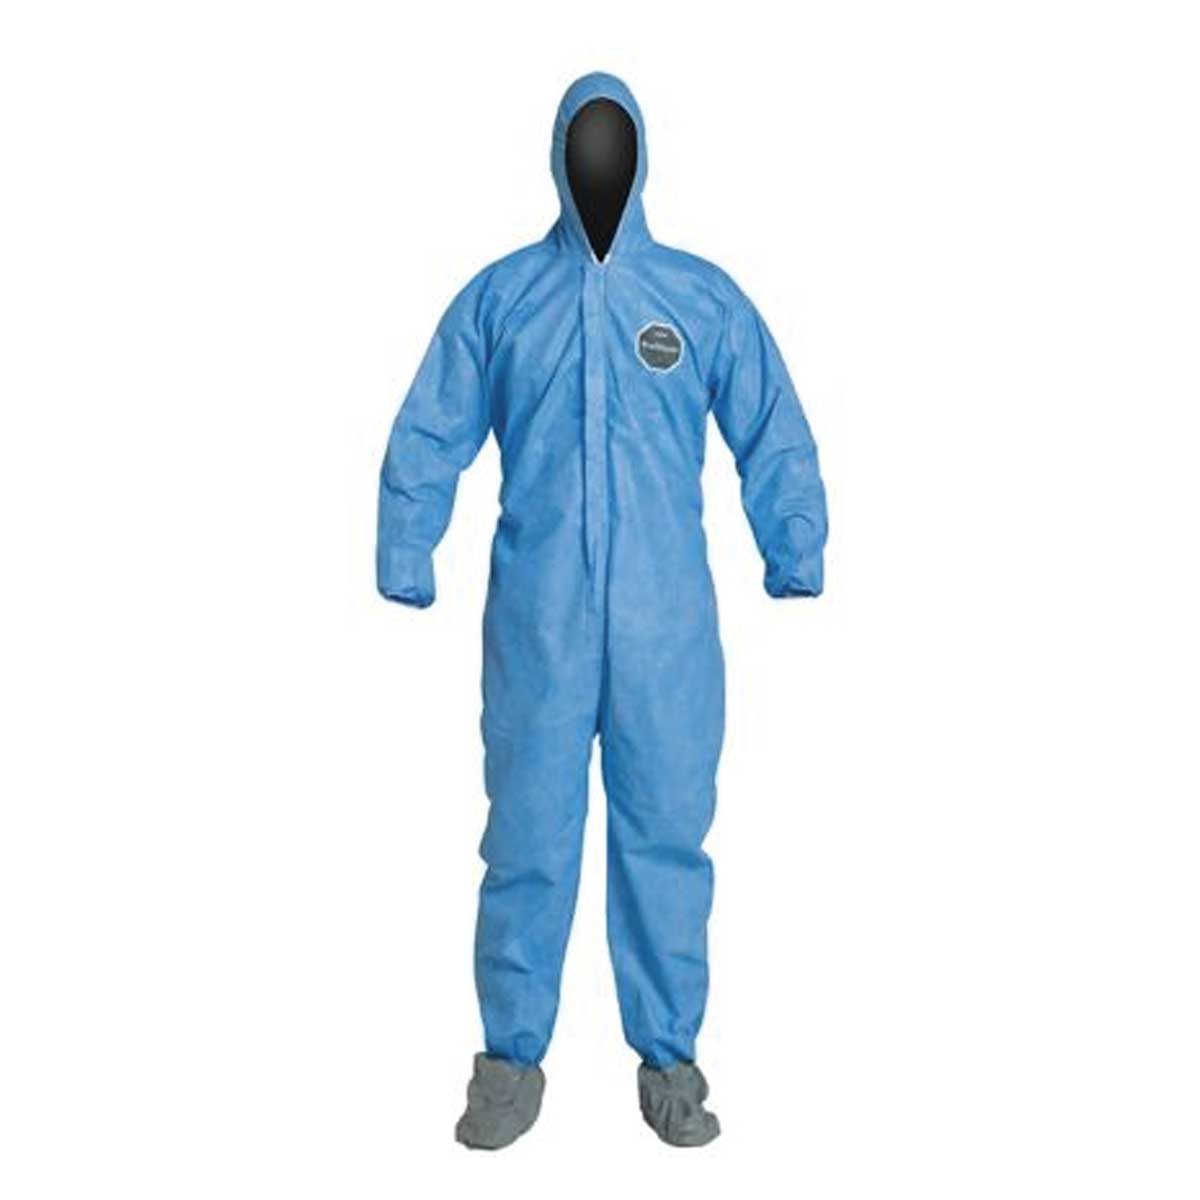 DuPont ProShield 10 Coveralls with Hood, Booties, and Serged Seams  |  25 Pack